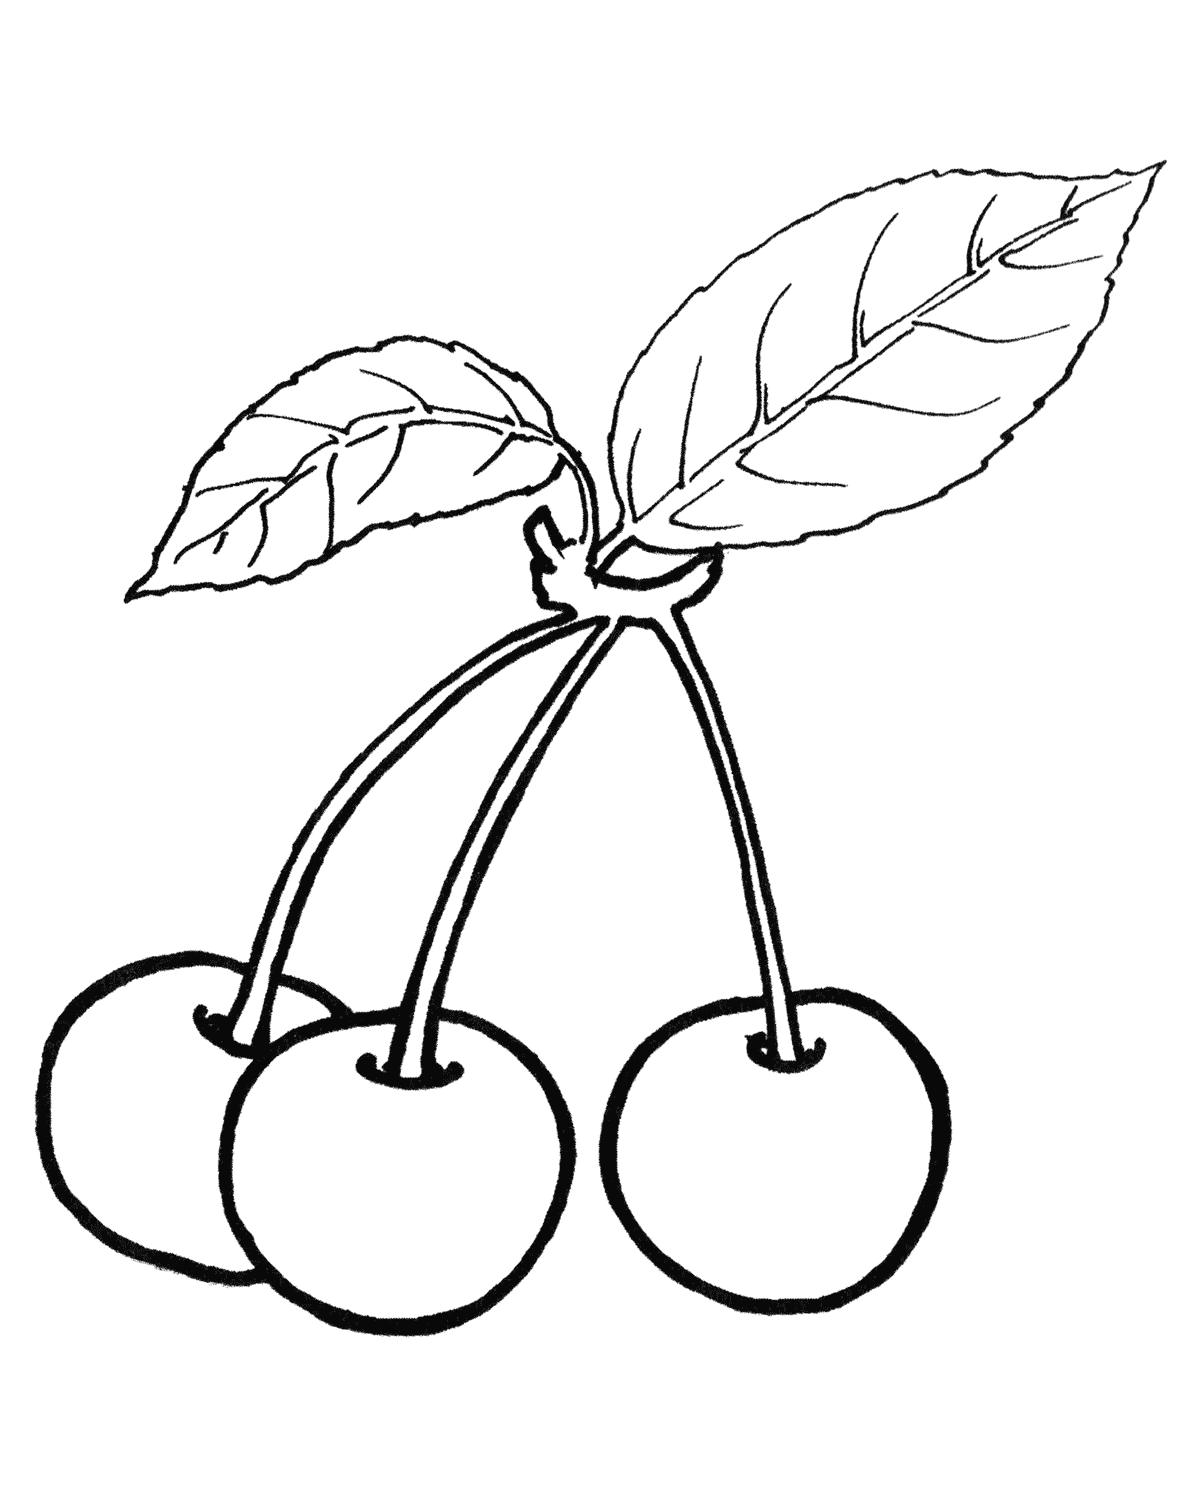 Coloring page - Cherries